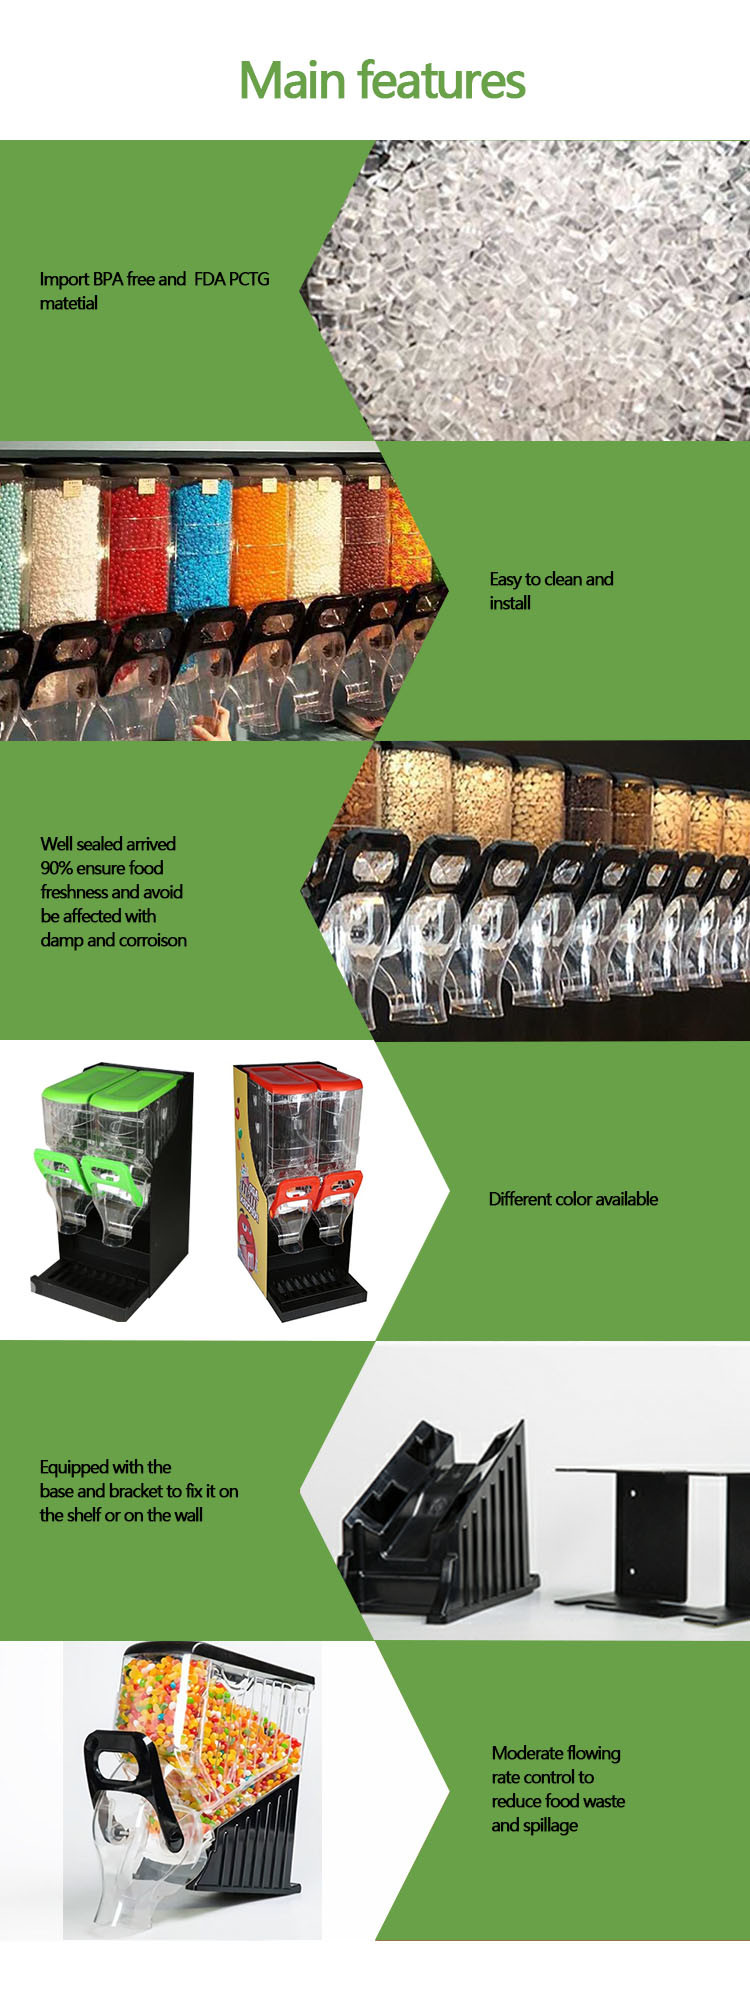 Wholesale Candy Displays Dispenser and Bins